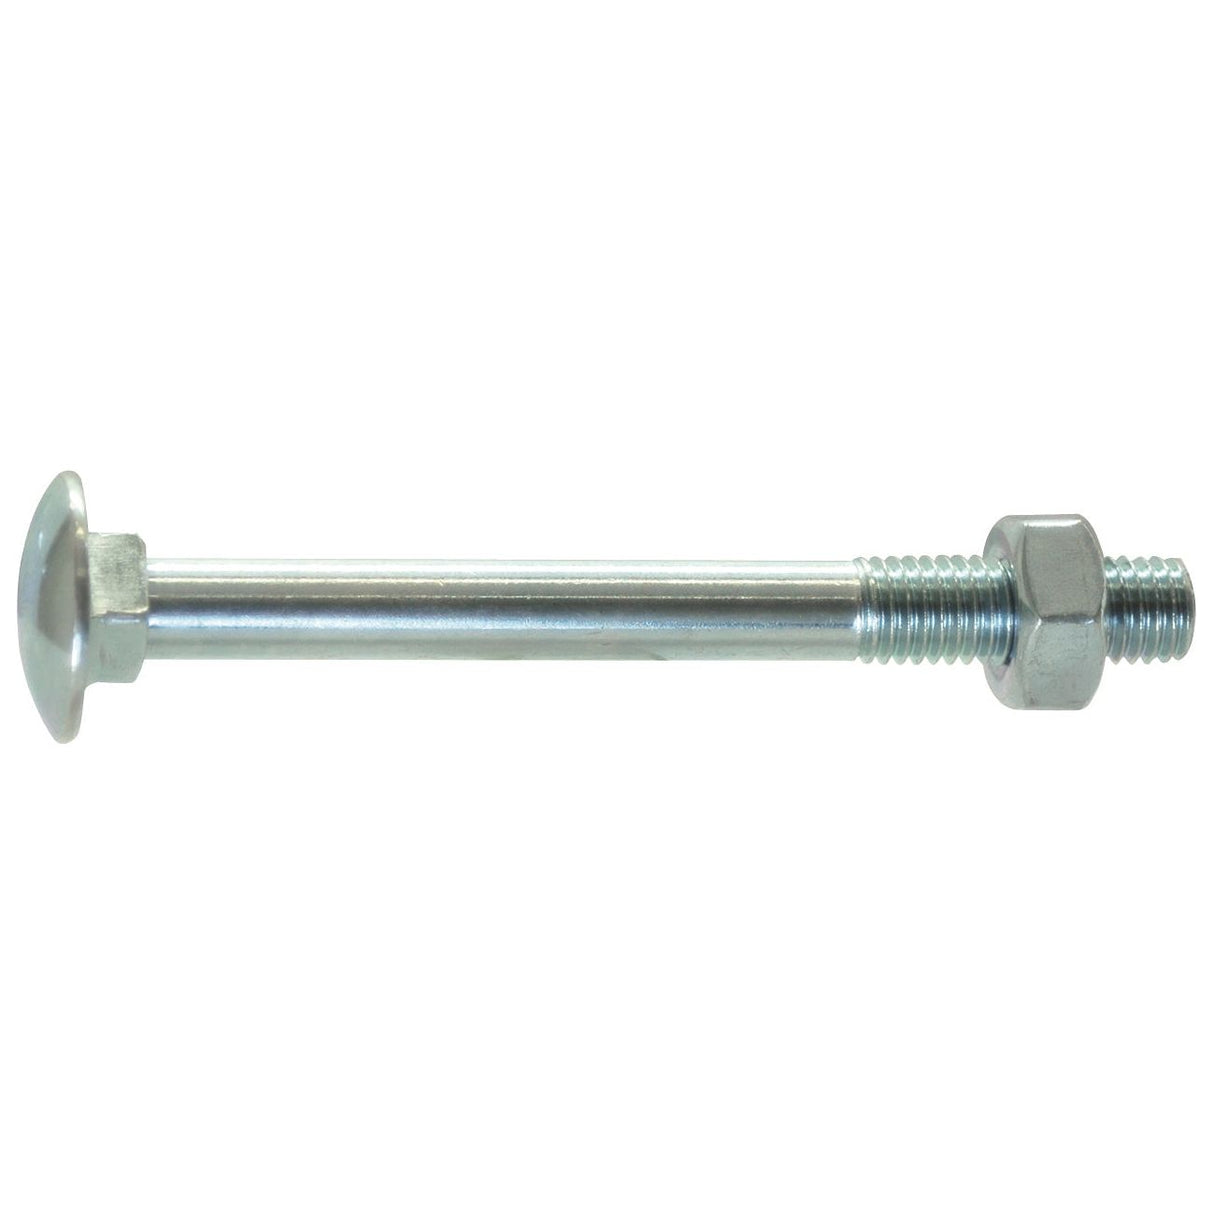 Metric Carriage Bolt and Nut, Size: M12 x 30mm (Din 603/555)
 - S.8295 - Farming Parts